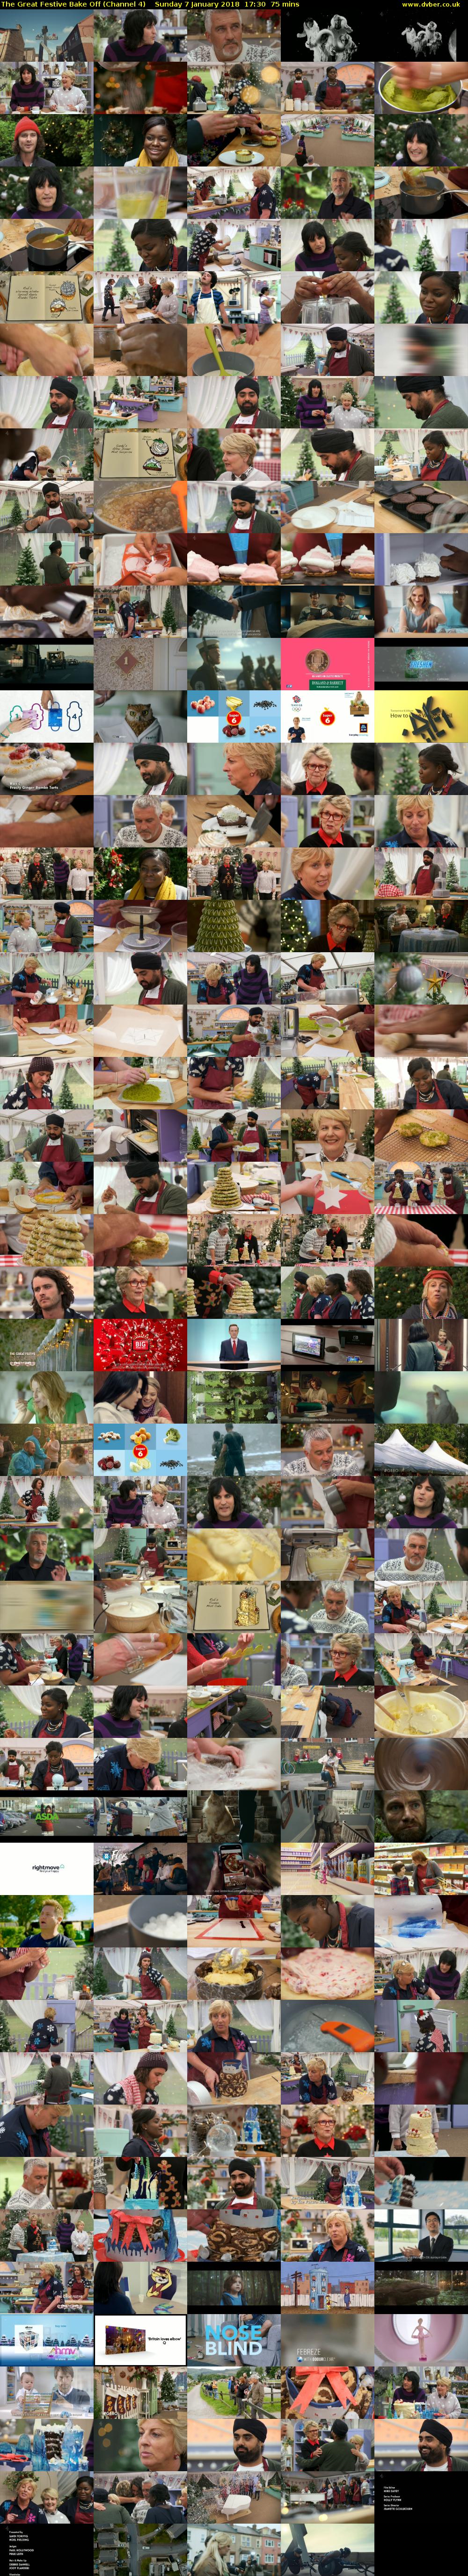 The Great Festive Bake Off (Channel 4) Sunday 7 January 2018 17:30 - 18:45